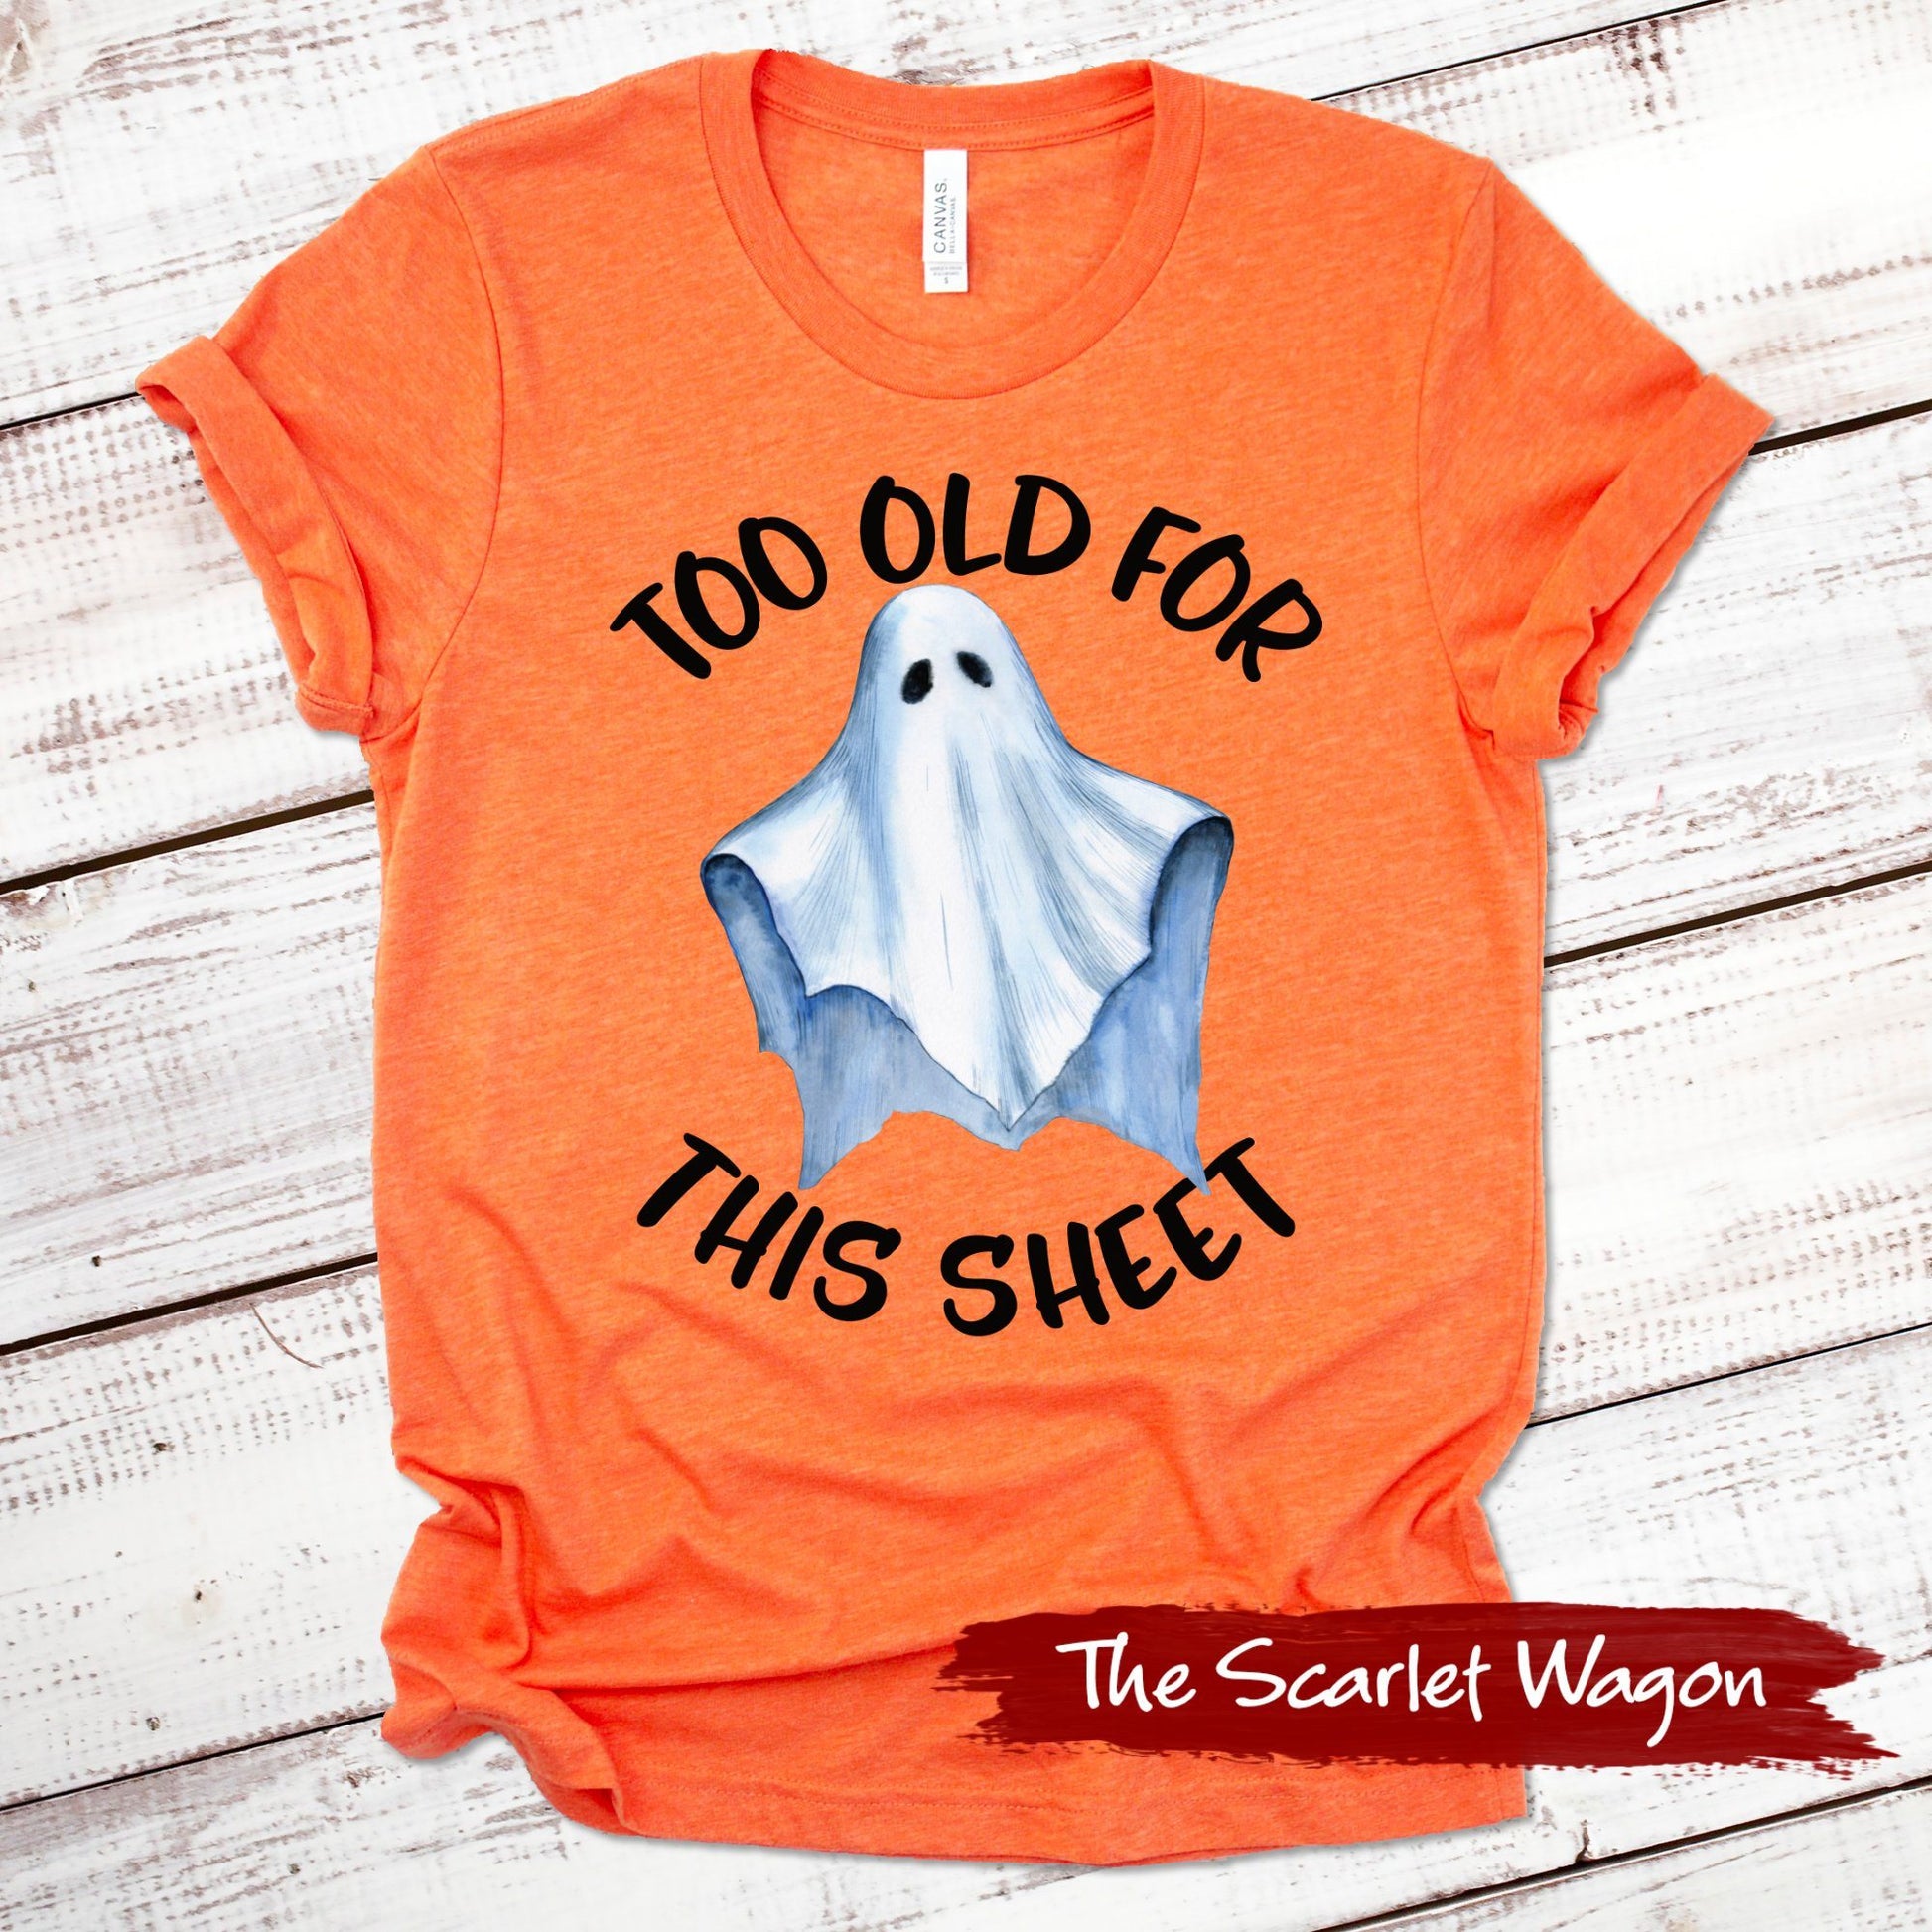 Too Old for This Sheet Halloween Shirt Scarlet Wagon Heather Orange XS 